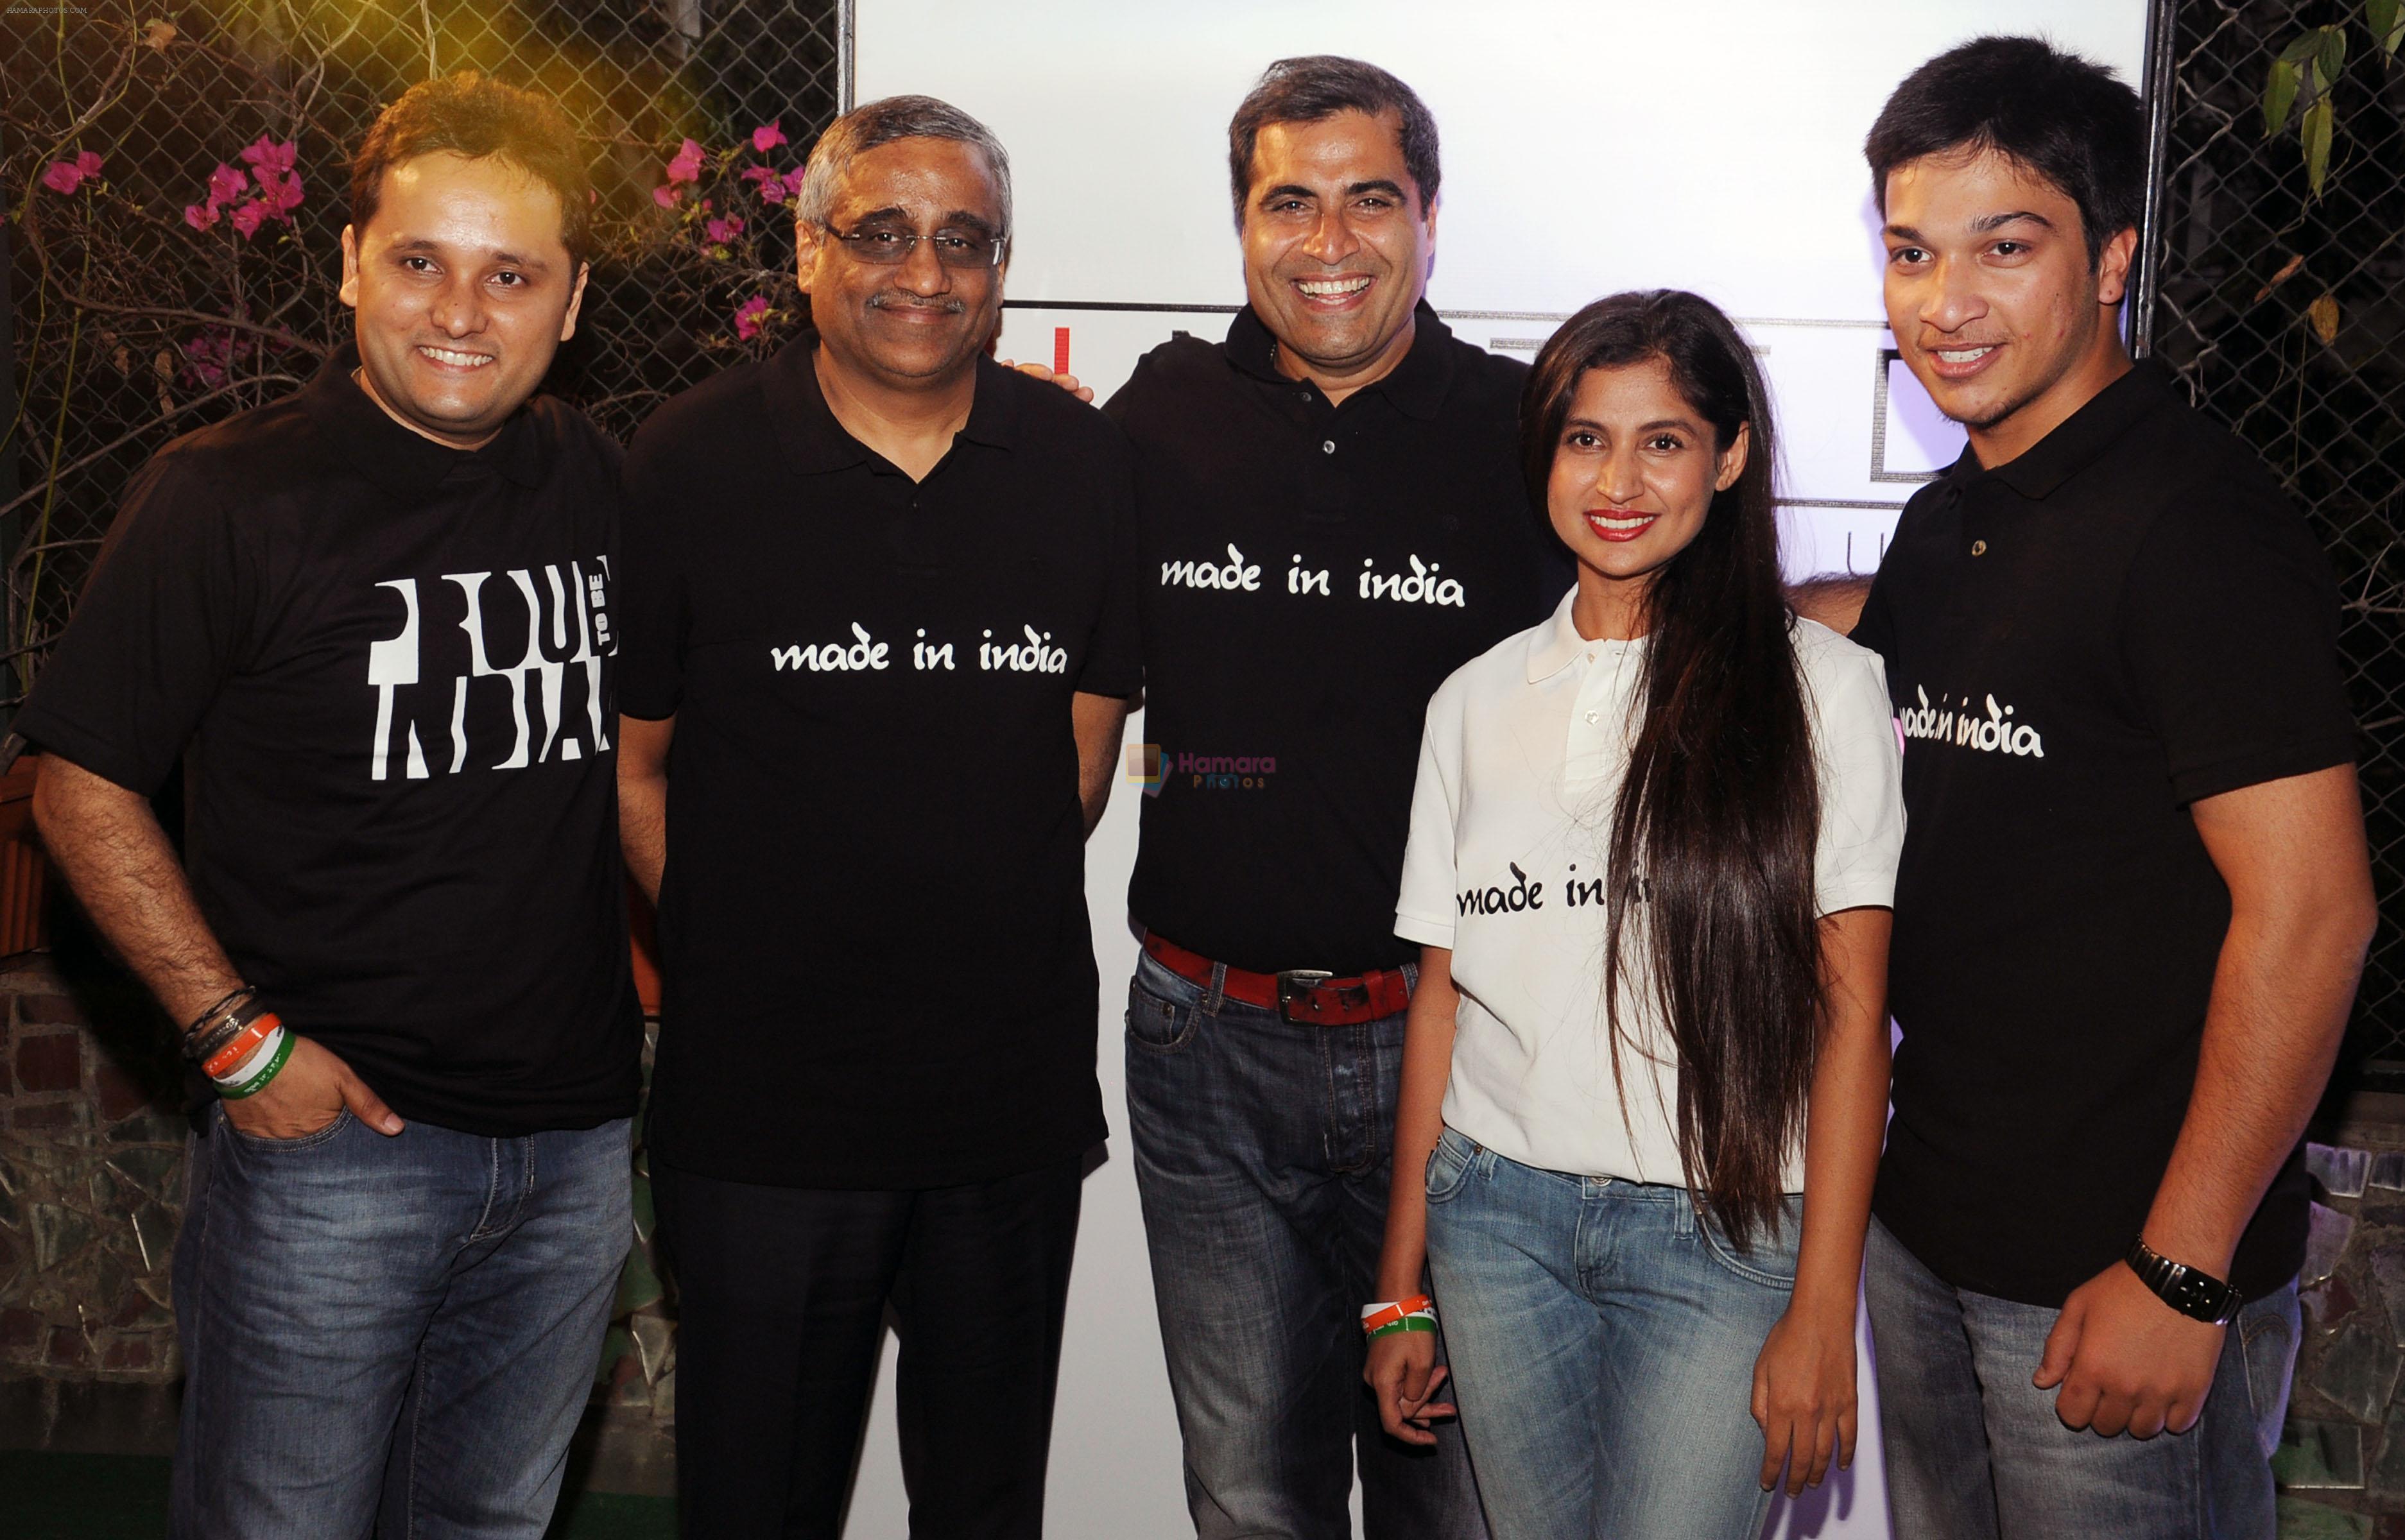 SHAILENDRA SINGH LAUNCHES MADE IN INDIA PROJECT on 19th Dec 2012